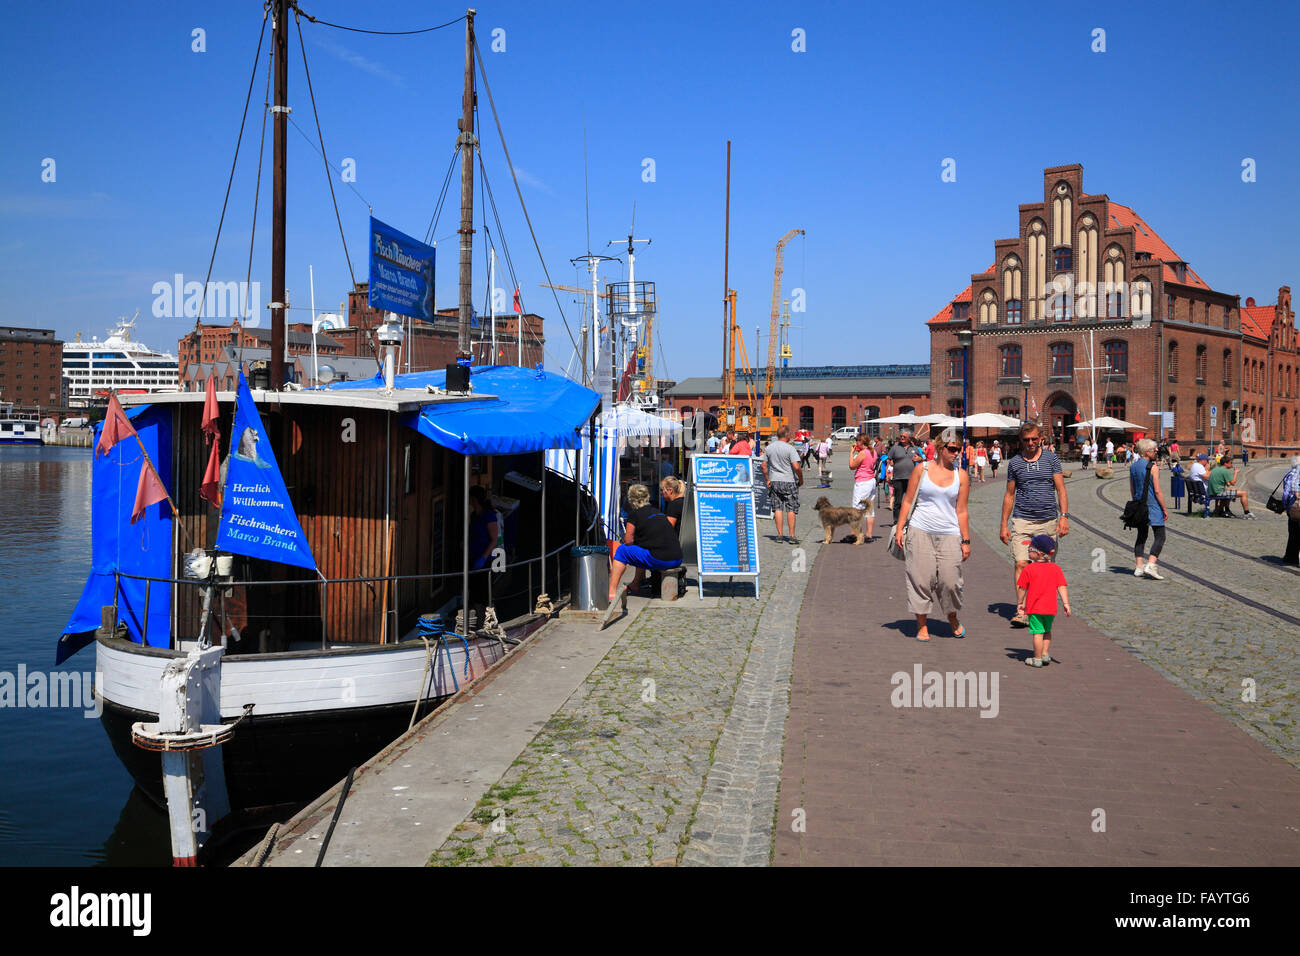 Selling fish from the trawler in the old harbour, Wismar, Baltic Sea, Mecklenburg Western Pomerania, Germany, Europe Stock Photo